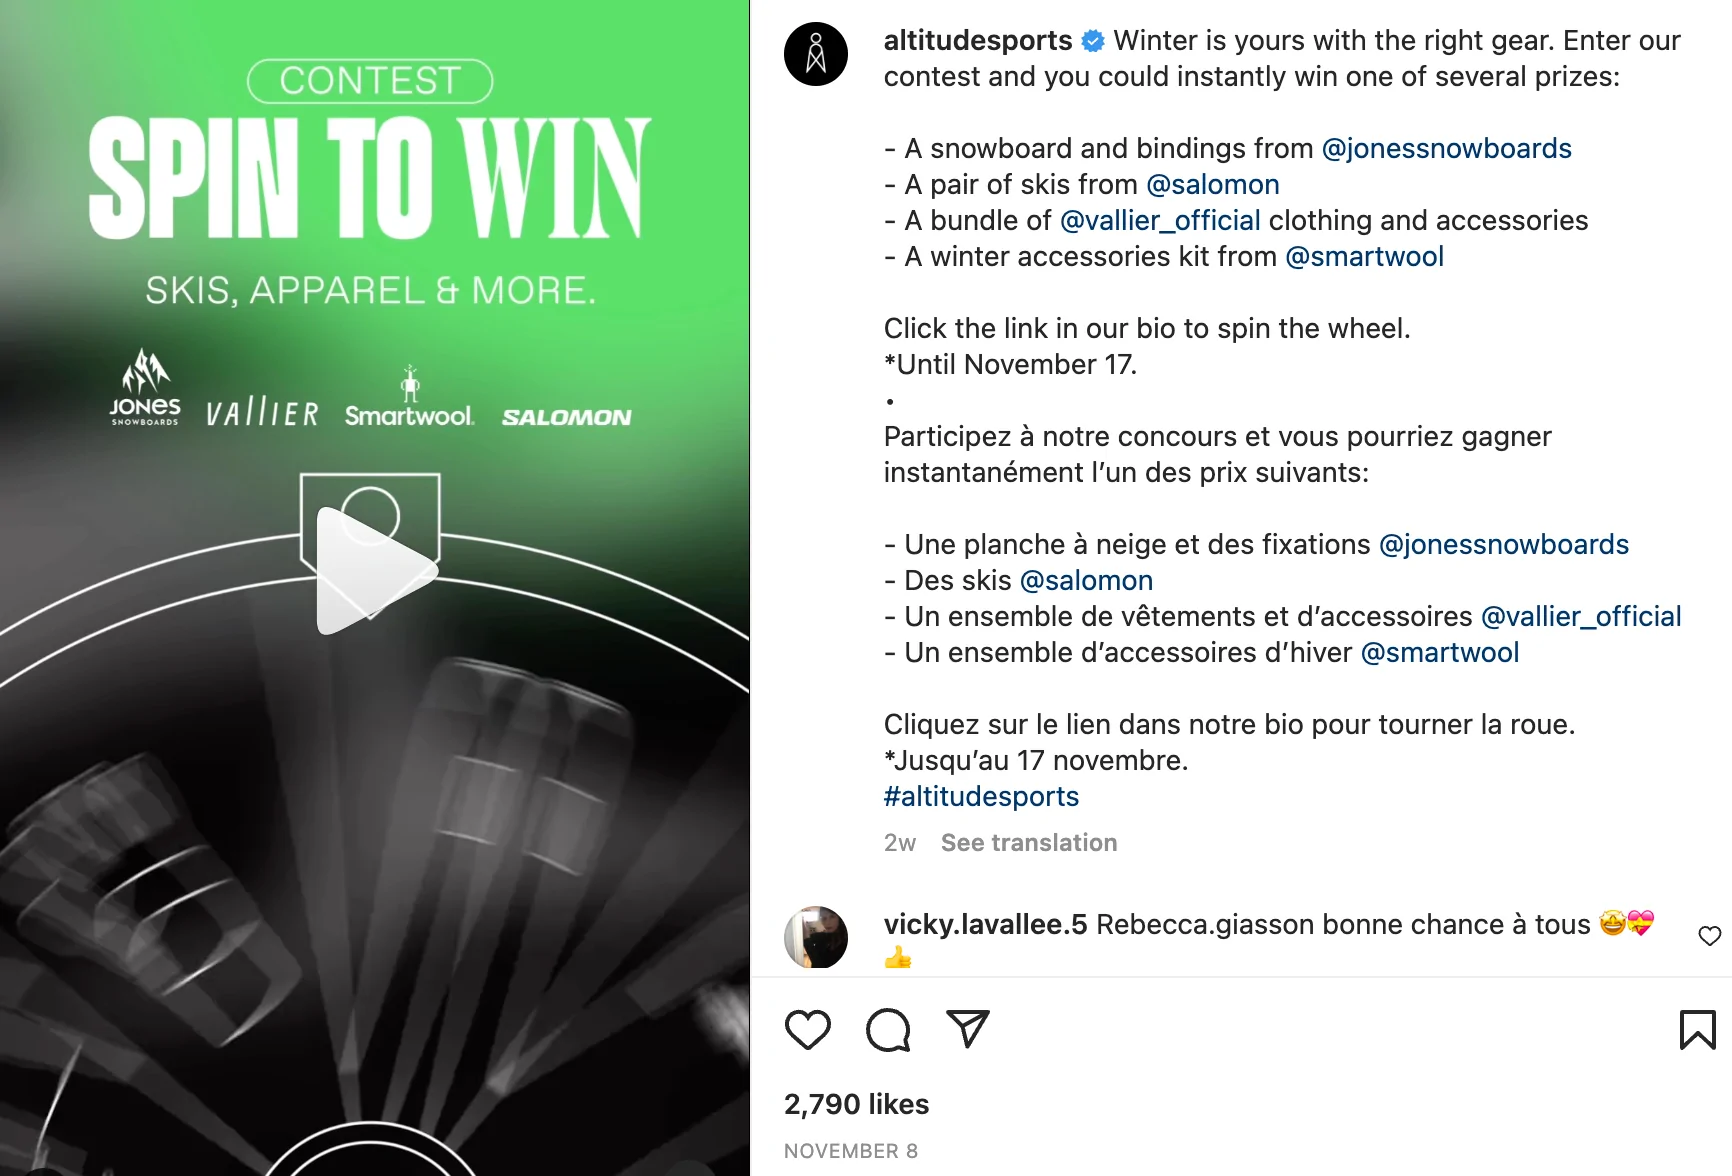 A social media post by Altitude sports promoting a giveaway